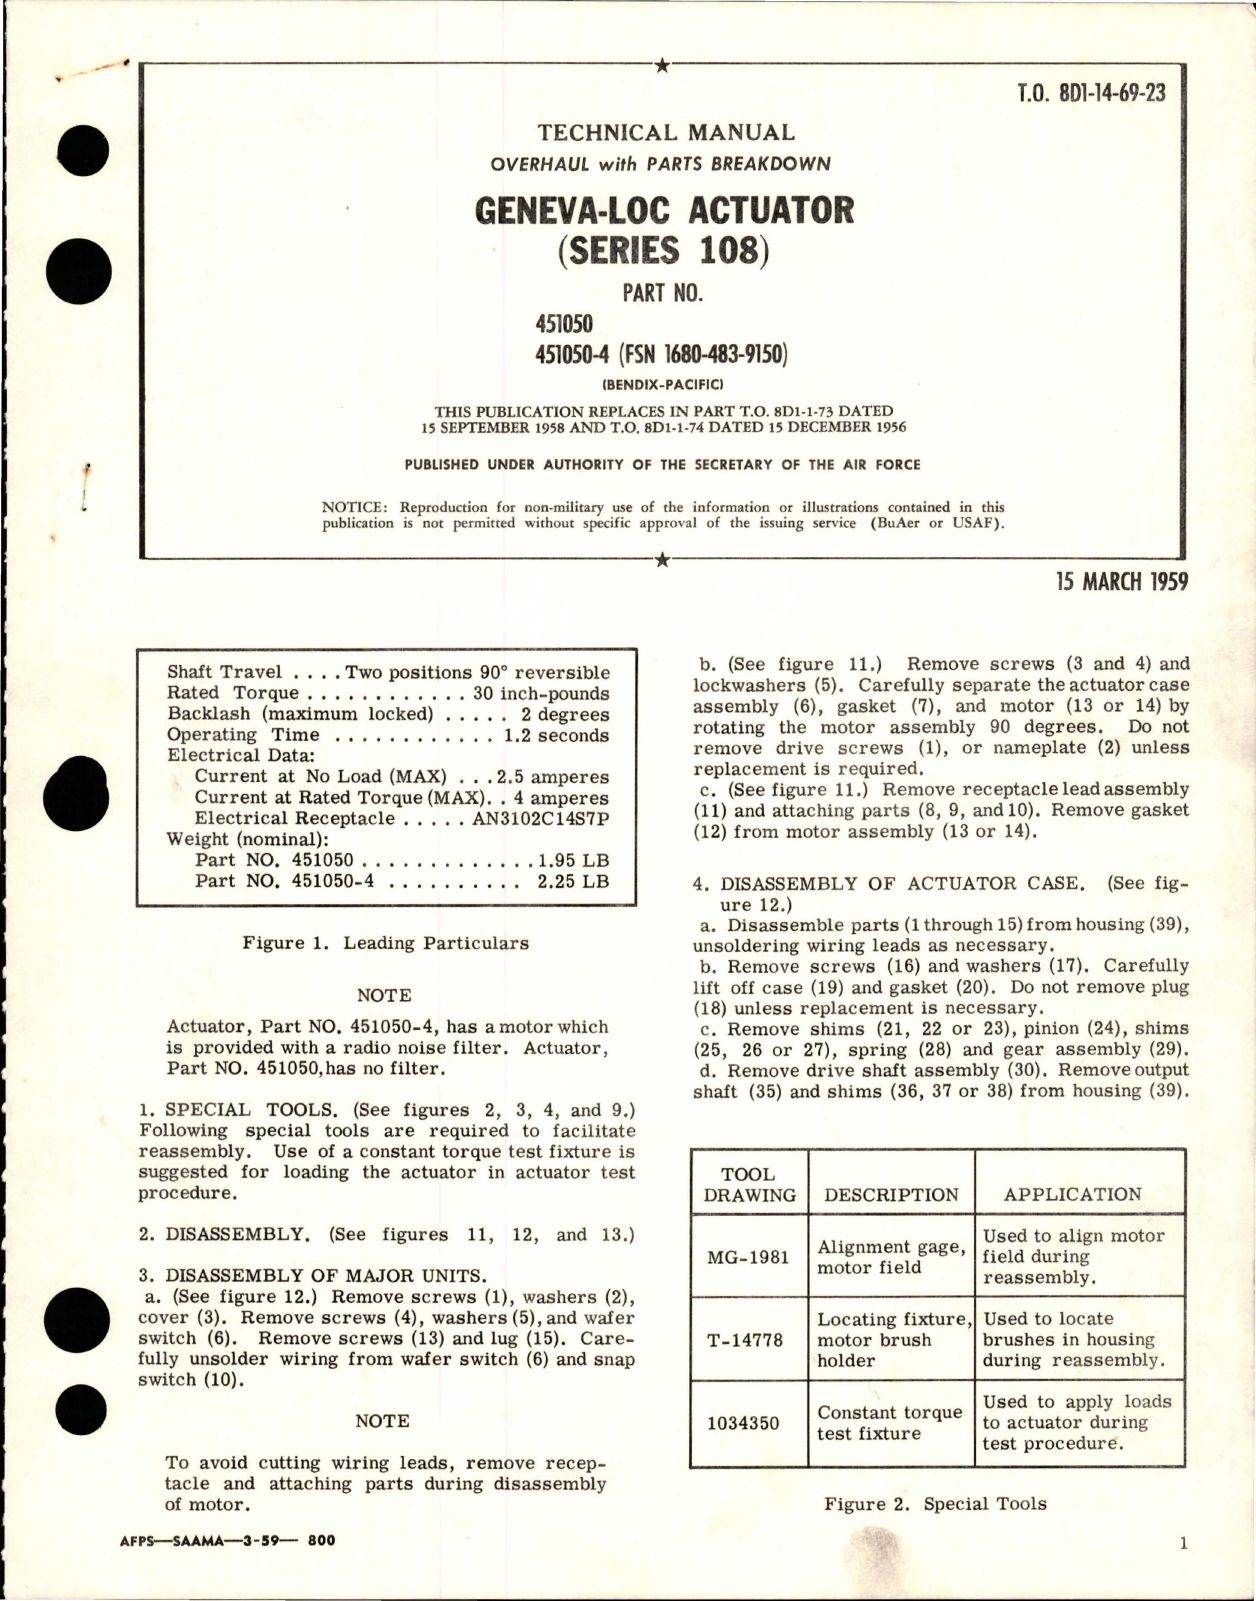 Sample page 1 from AirCorps Library document: Overhaul with Parts Breakdown for Geneva-Loc Actuator - Series 108 - Parts 451050 and 451050-4 